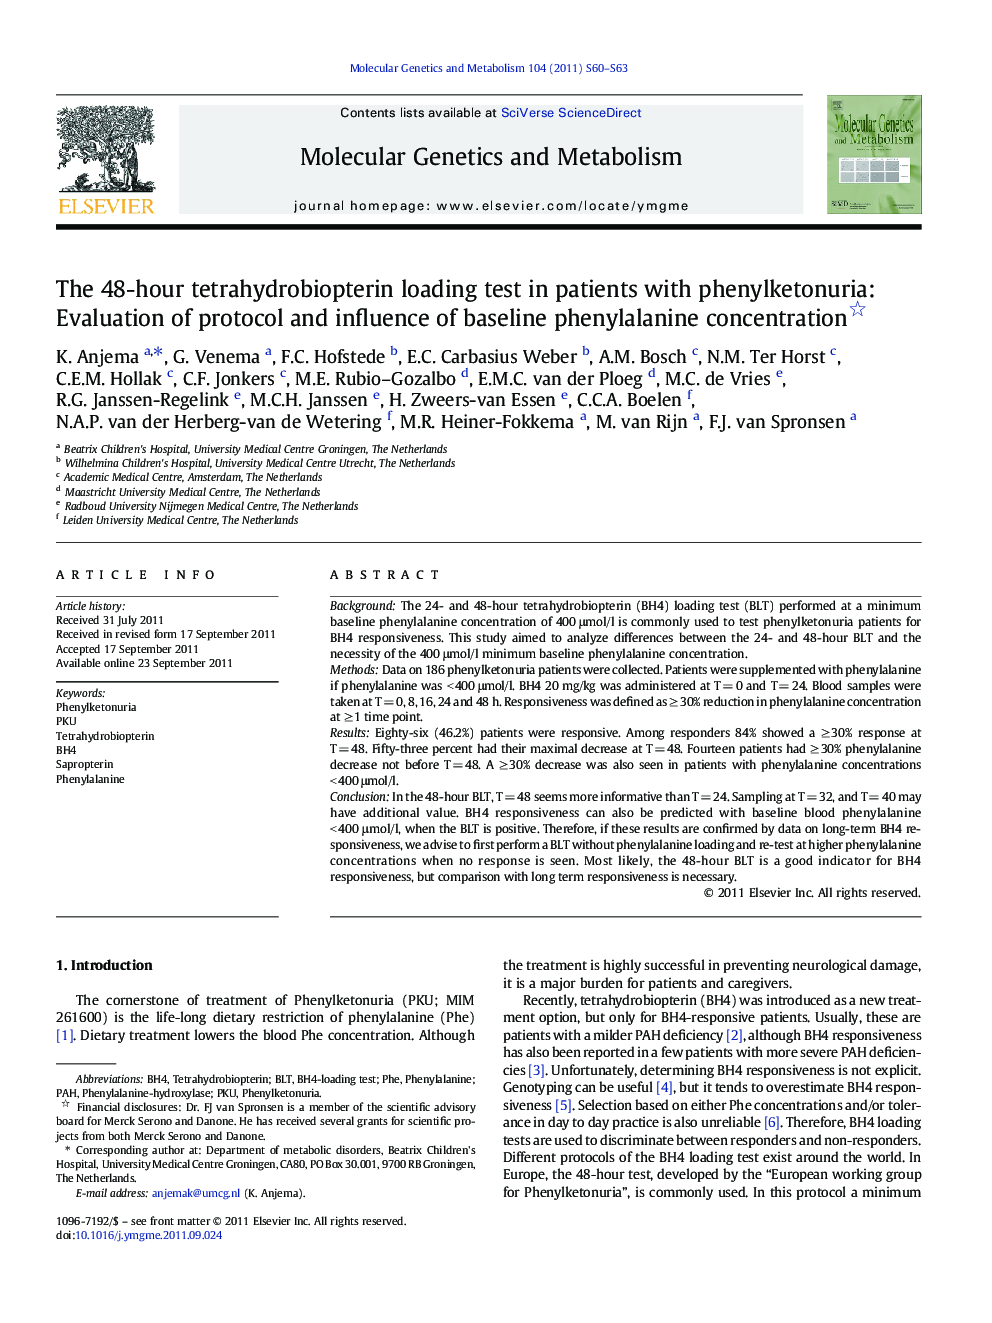 The 48-hour tetrahydrobiopterin loading test in patients with phenylketonuria: Evaluation of protocol and influence of baseline phenylalanine concentration 